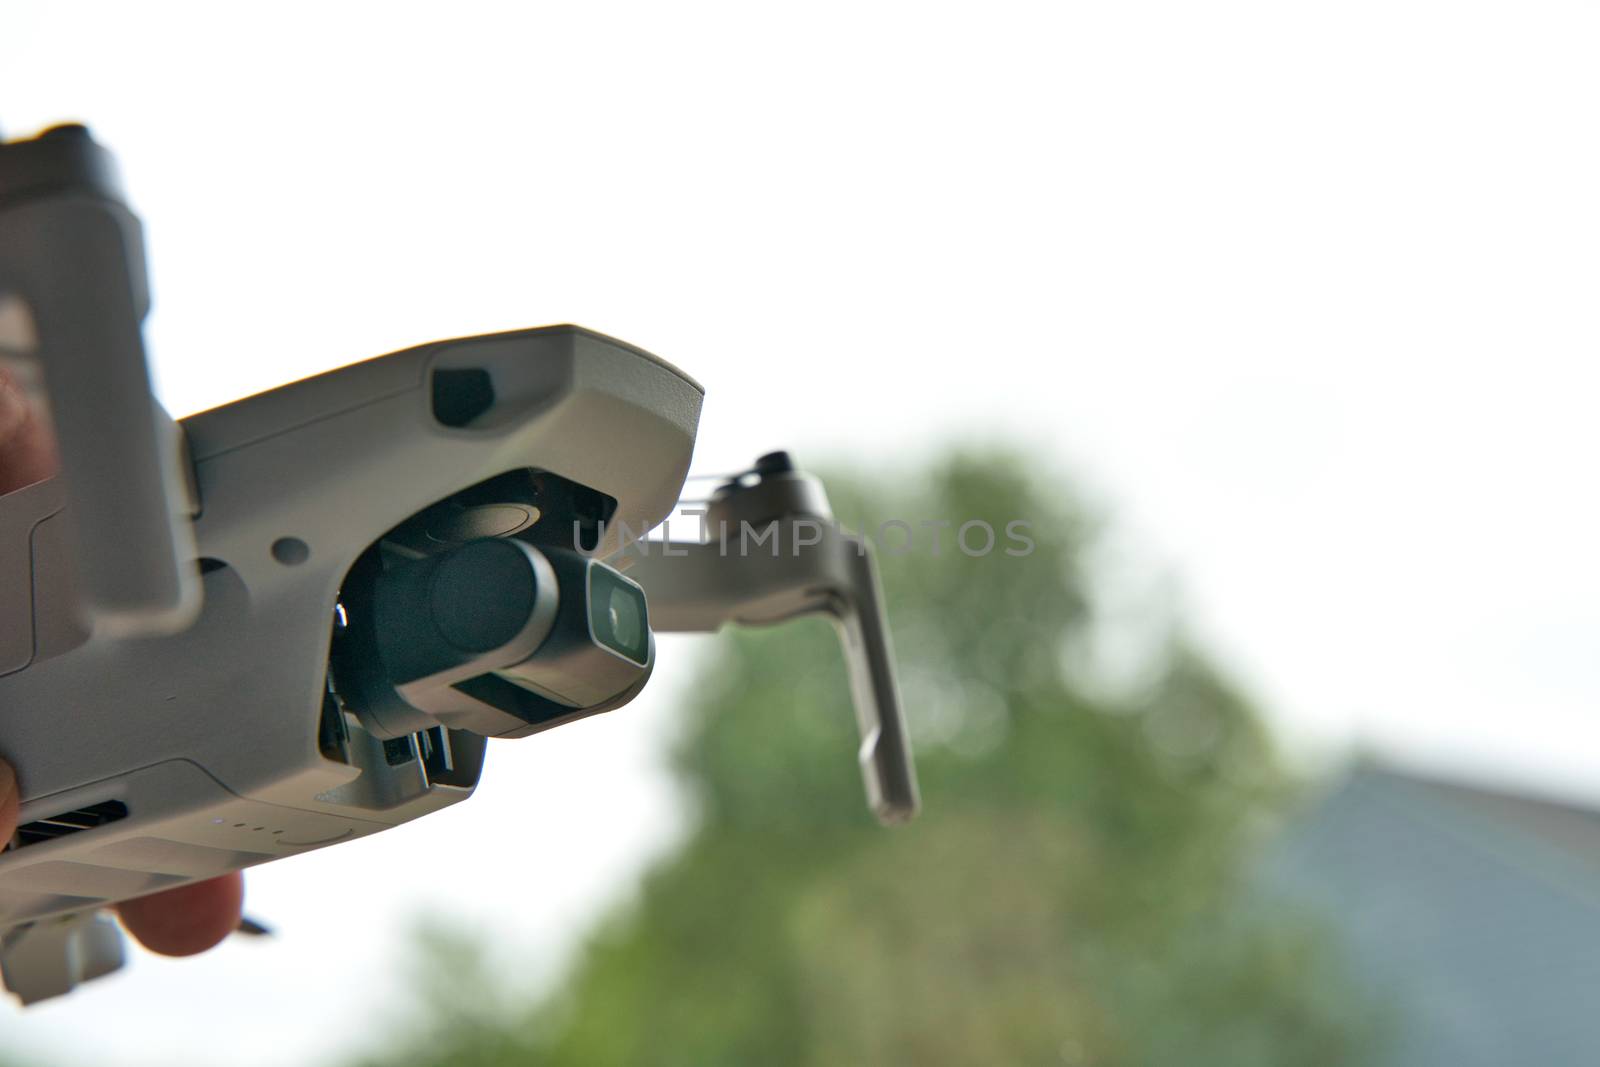 Underside of drone in flight. Tree and sky visible in background. Small drone product picture. Flying drone in house